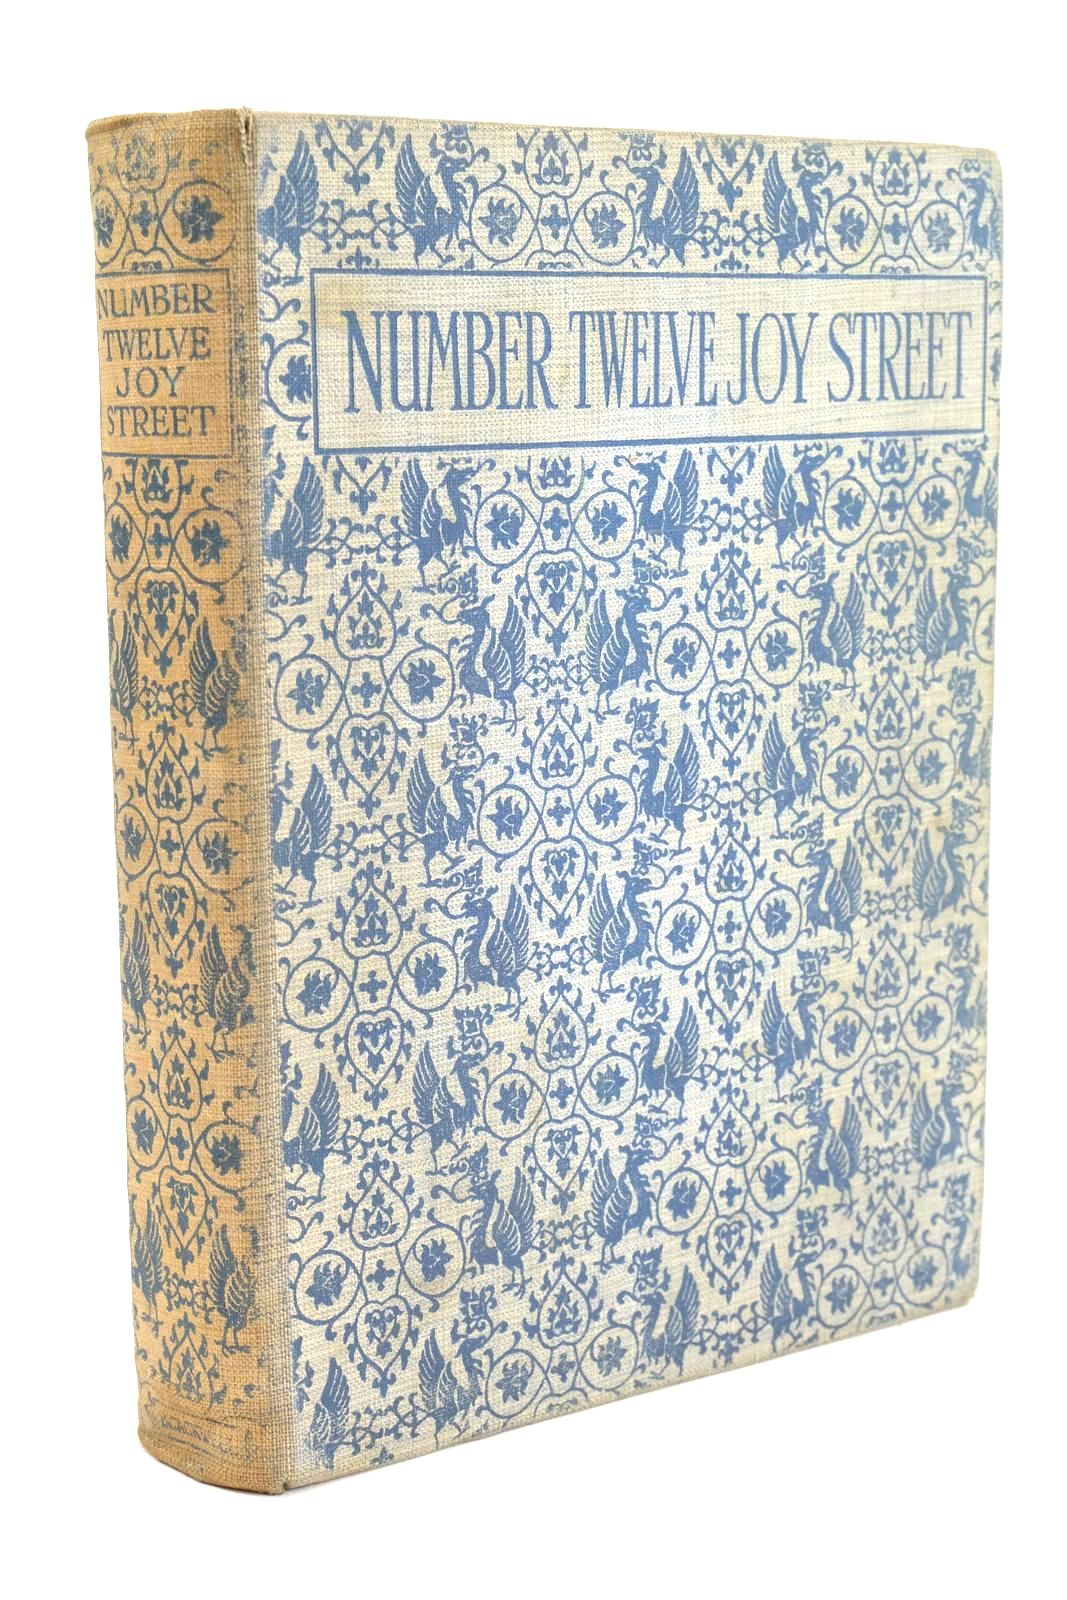 Photo of NUMBER TWELVE JOY STREET written by Marlowe, Mabel Nightingale, Madeleine Fyleman, Rose Farjeon, Eleanor et al,  illustrated by Brightwell, L.R. Baker, Mary Rountree, Harry et al.,  published by Basil Blackwell (STOCK CODE: 1324626)  for sale by Stella & Rose's Books